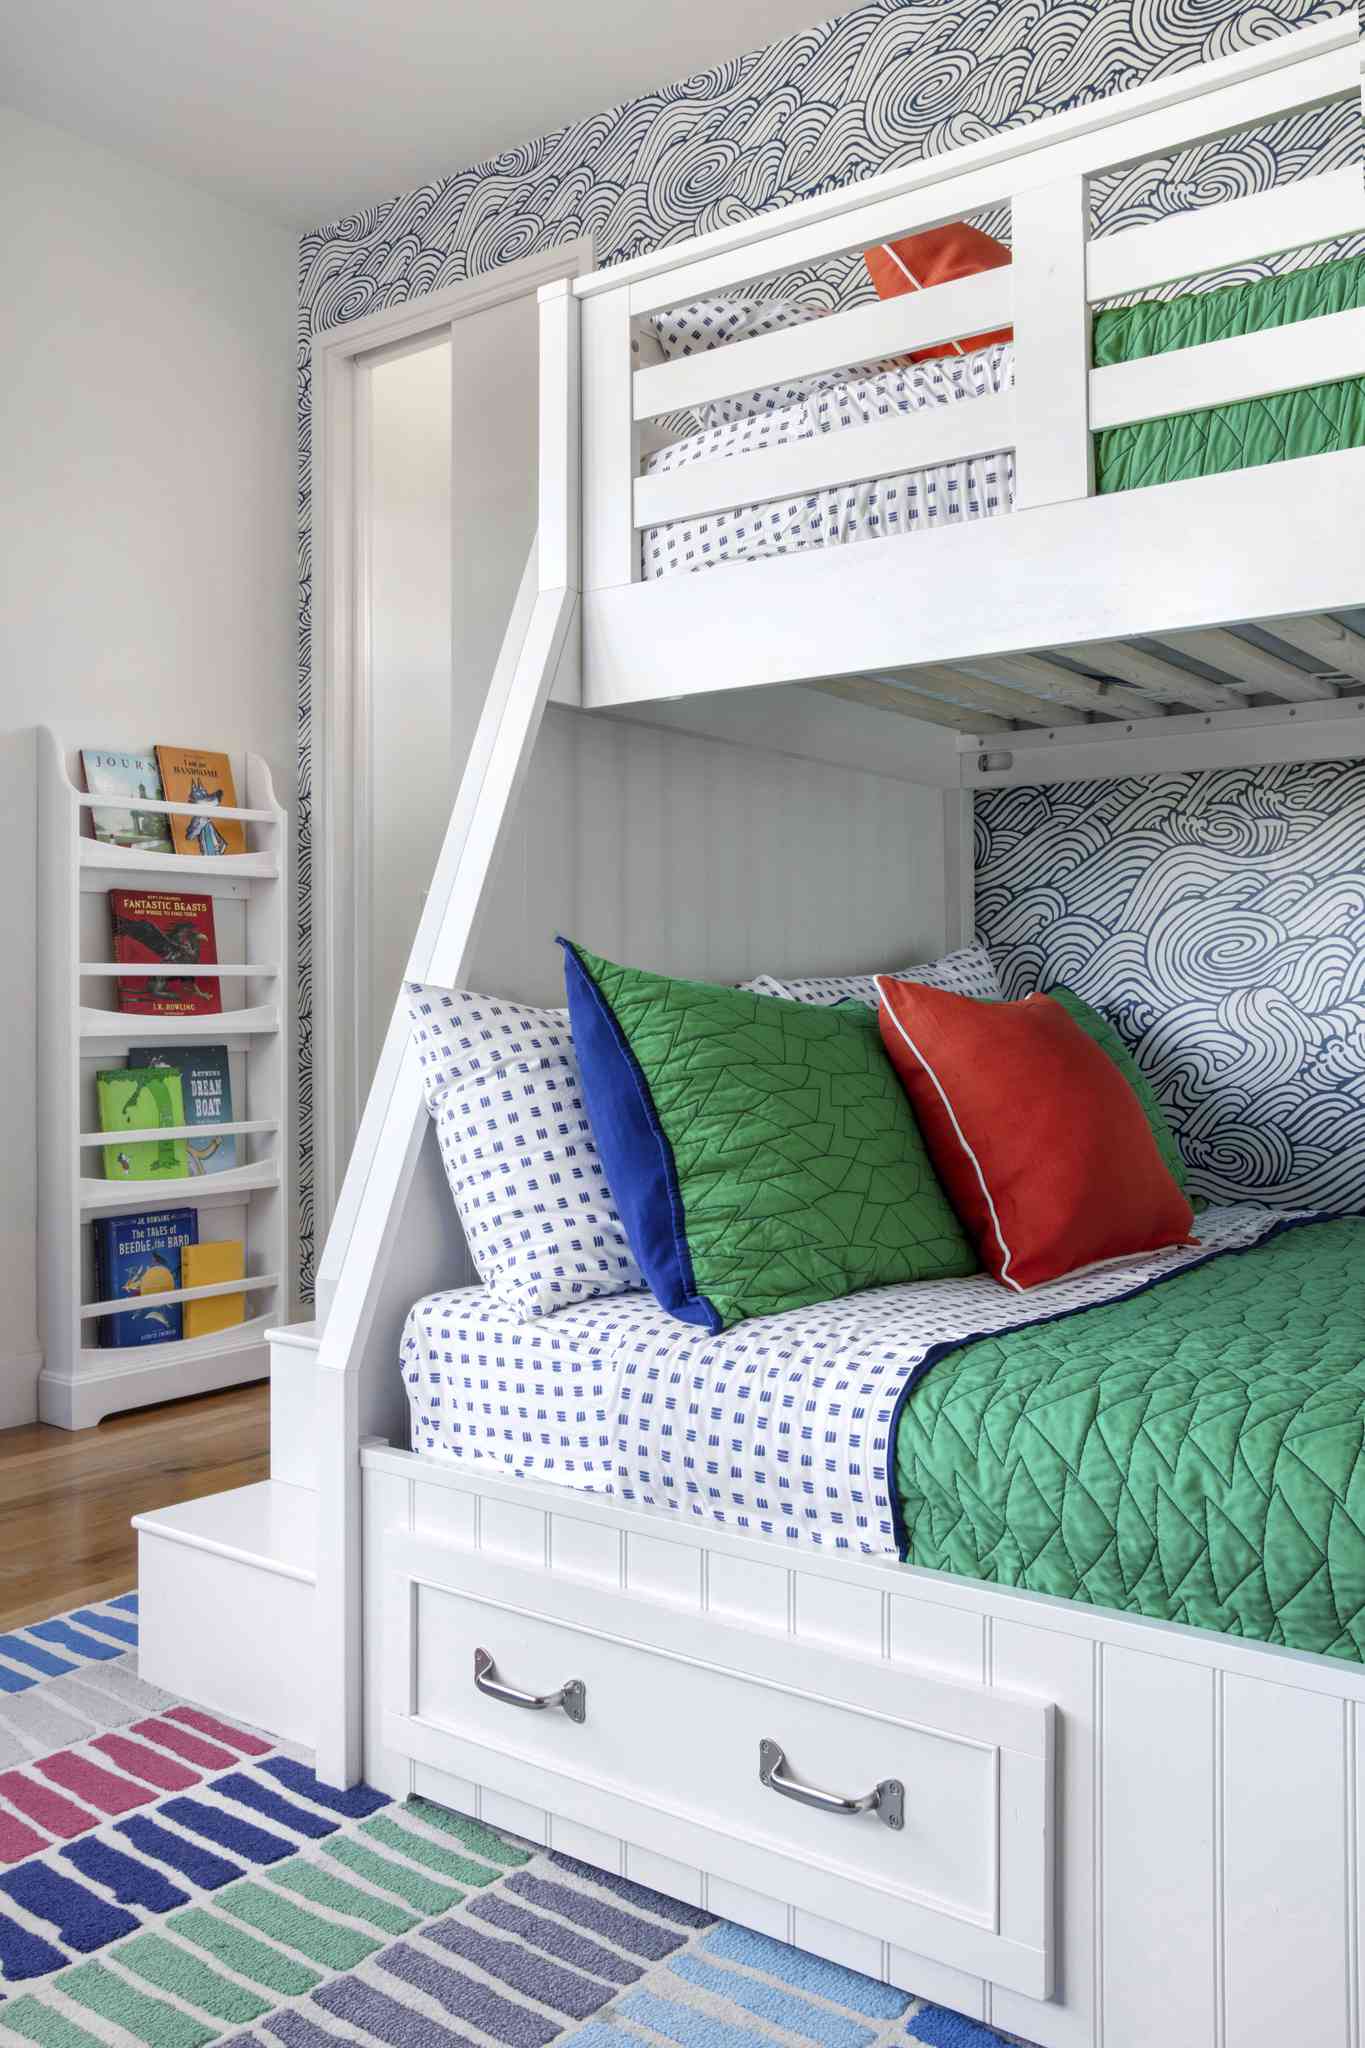 swirly blue-and-white wallpaper in this kid bedroom featuring a bunk bed and primary colors